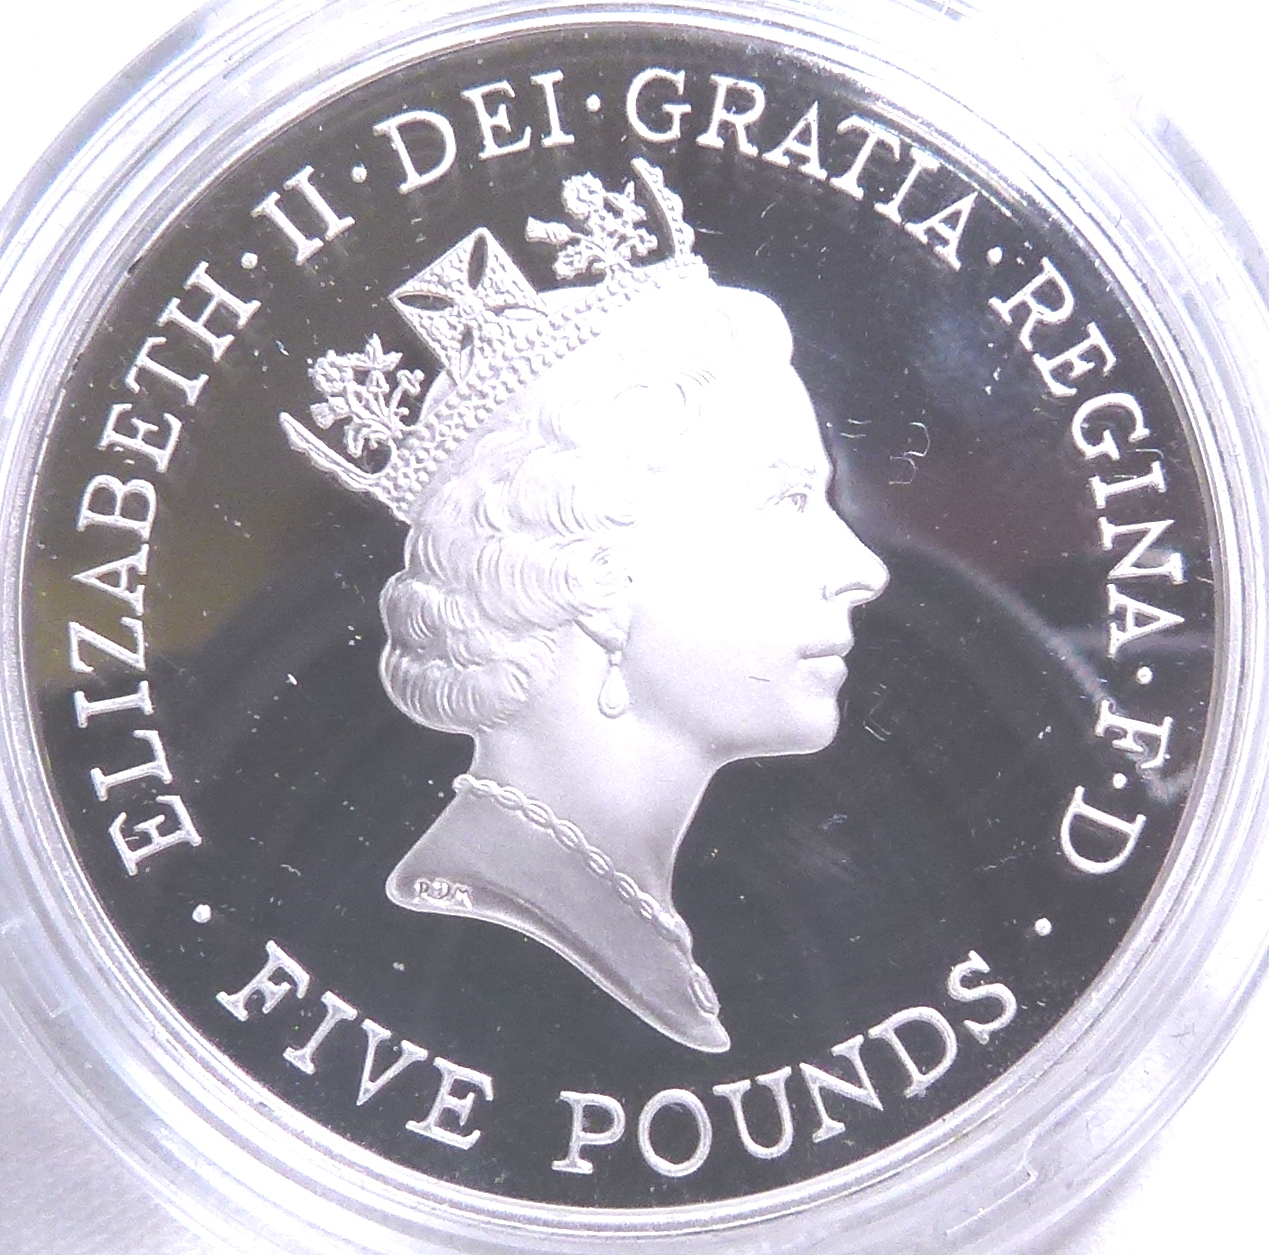 £5 SILVER PROOF COIN. - Image 2 of 2